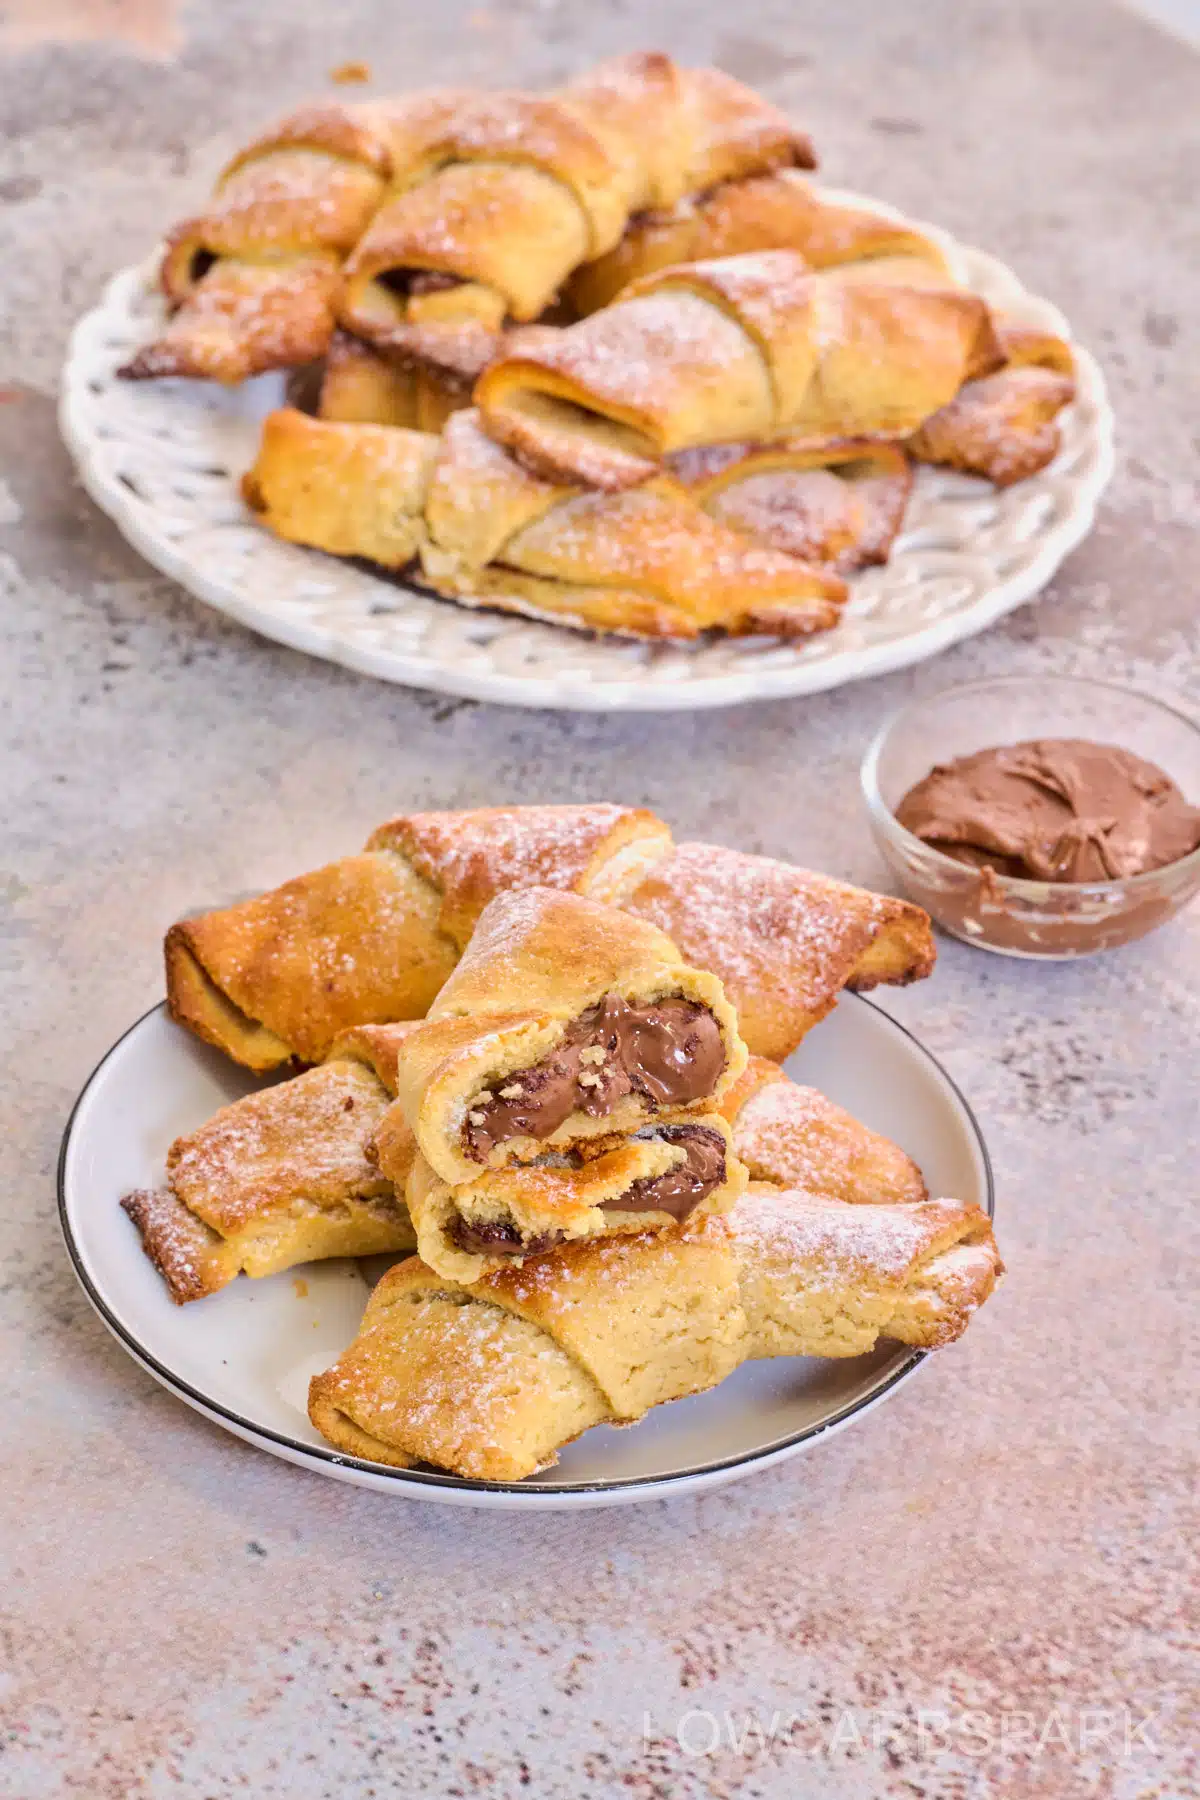 keto chocolate croissants on a plate